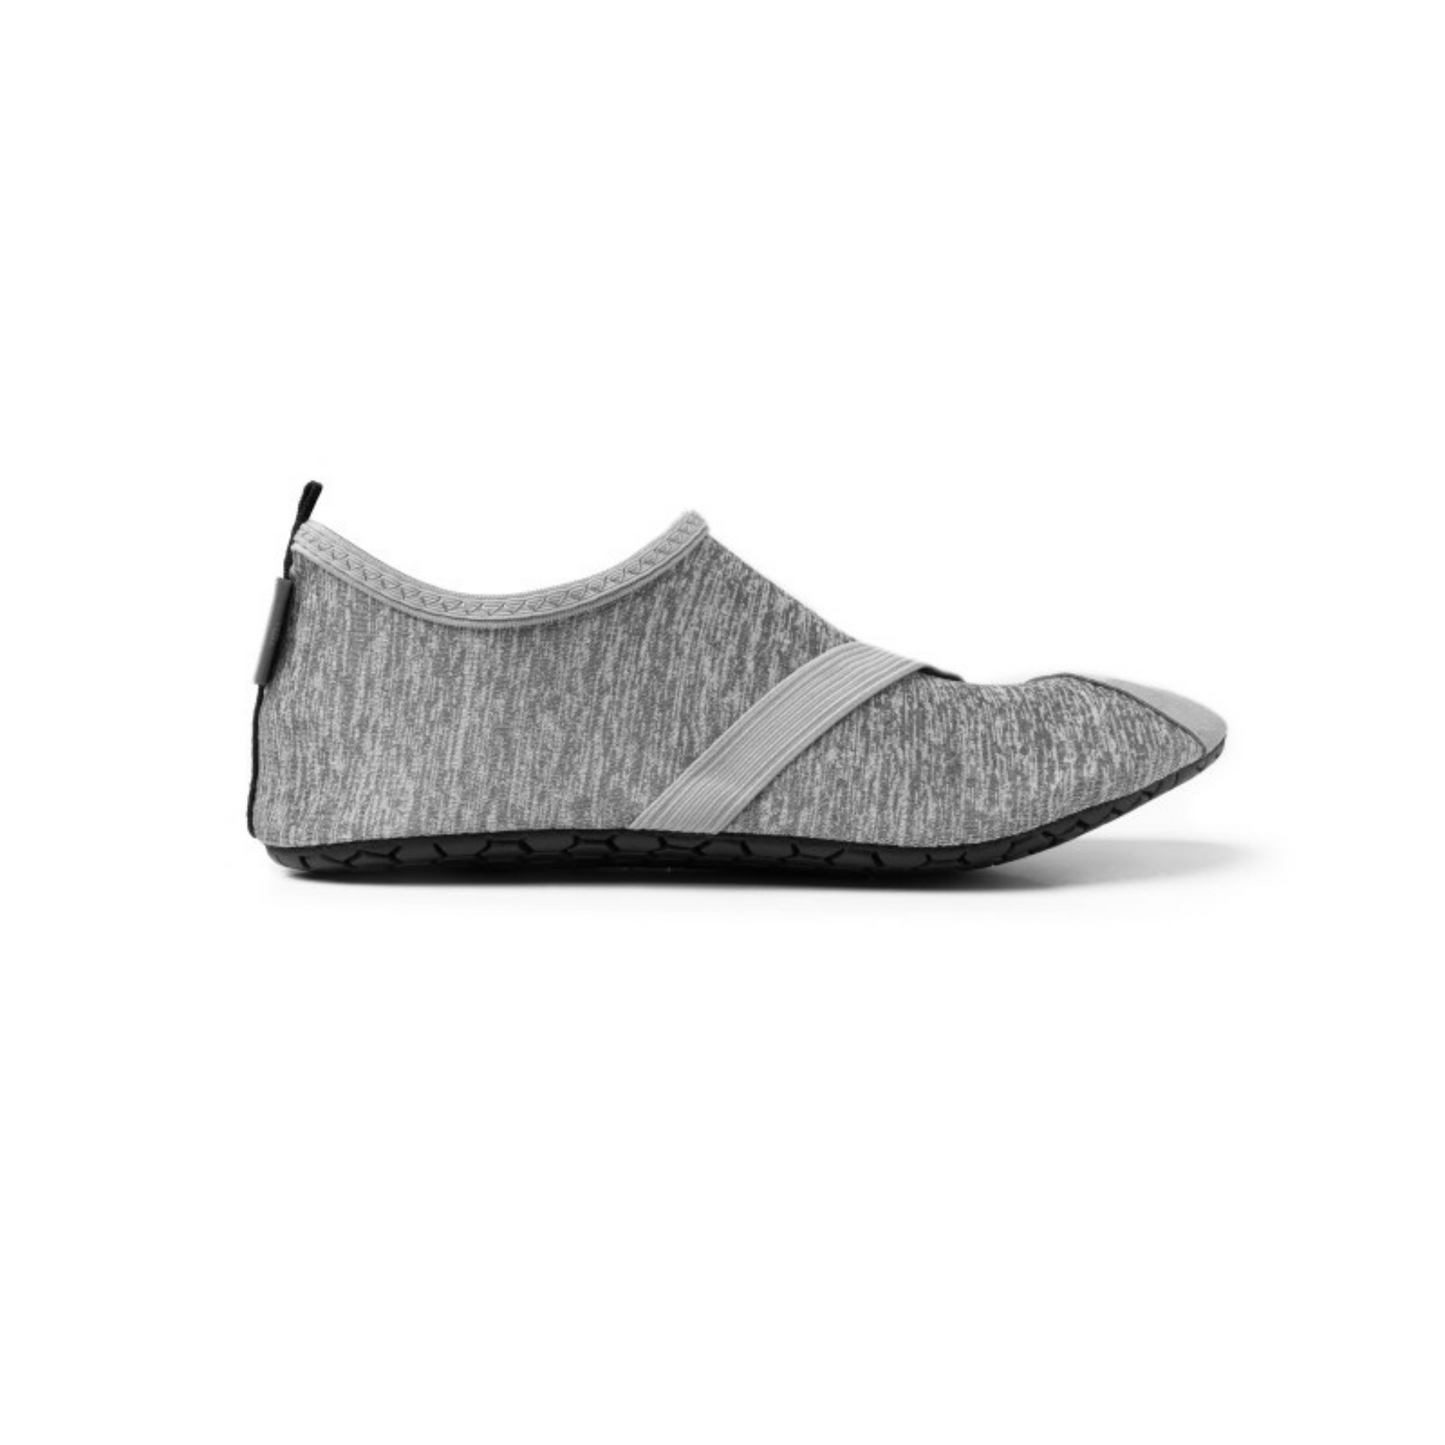 heather grey fitkick active footwear